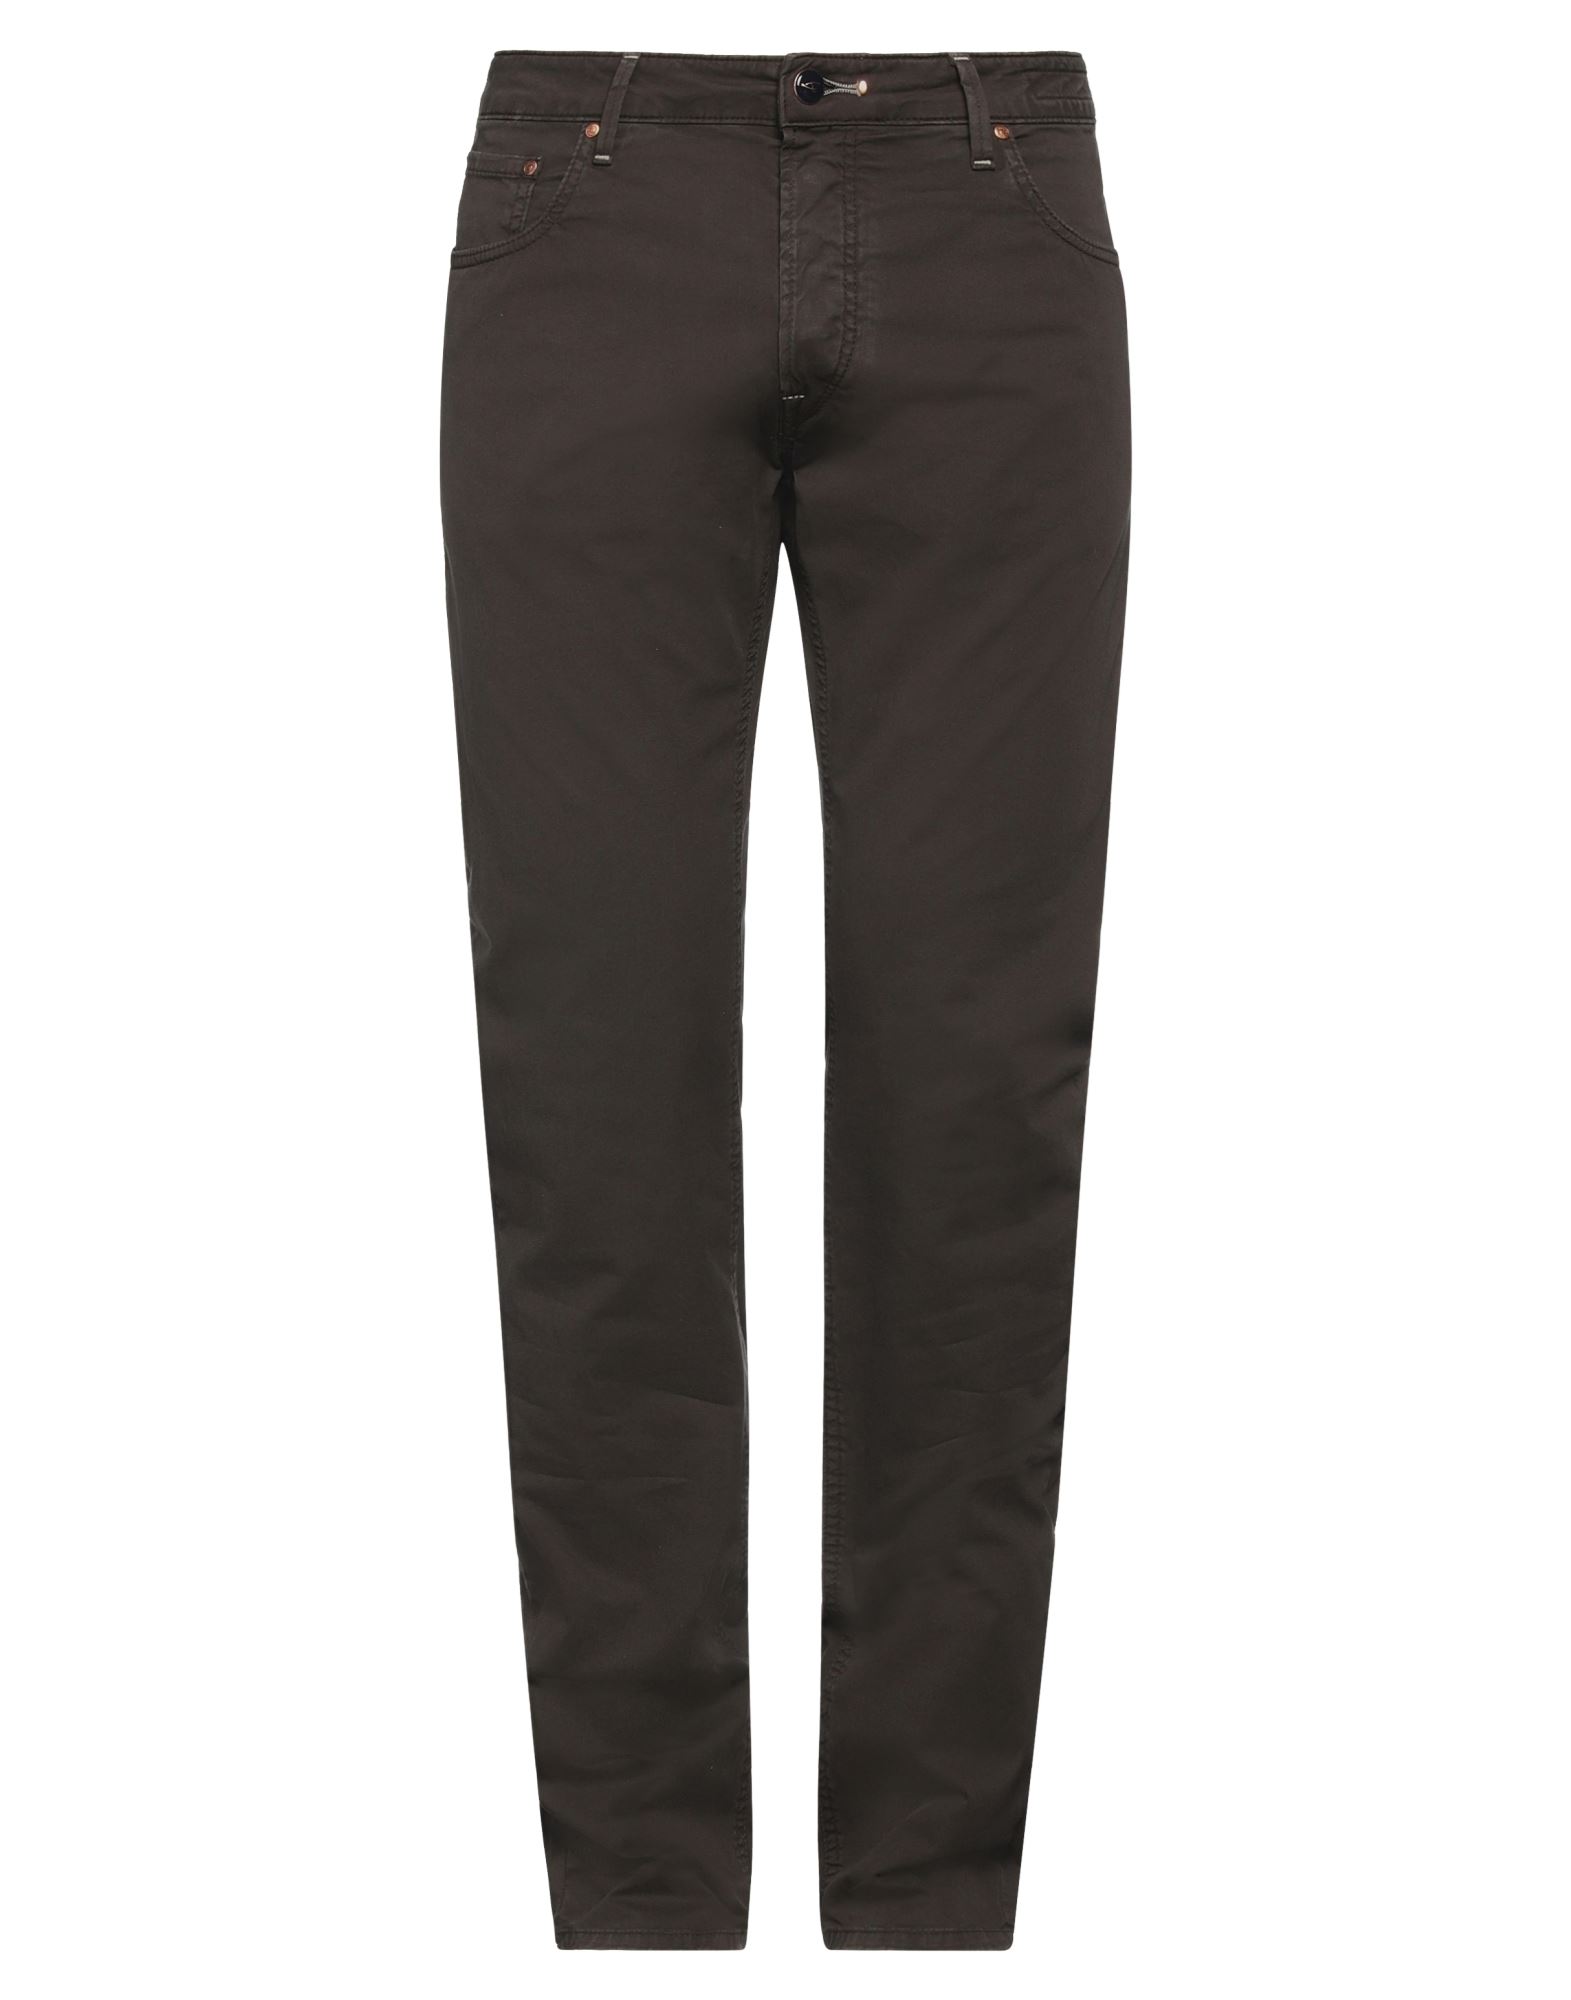 Hand Picked Pants In Brown